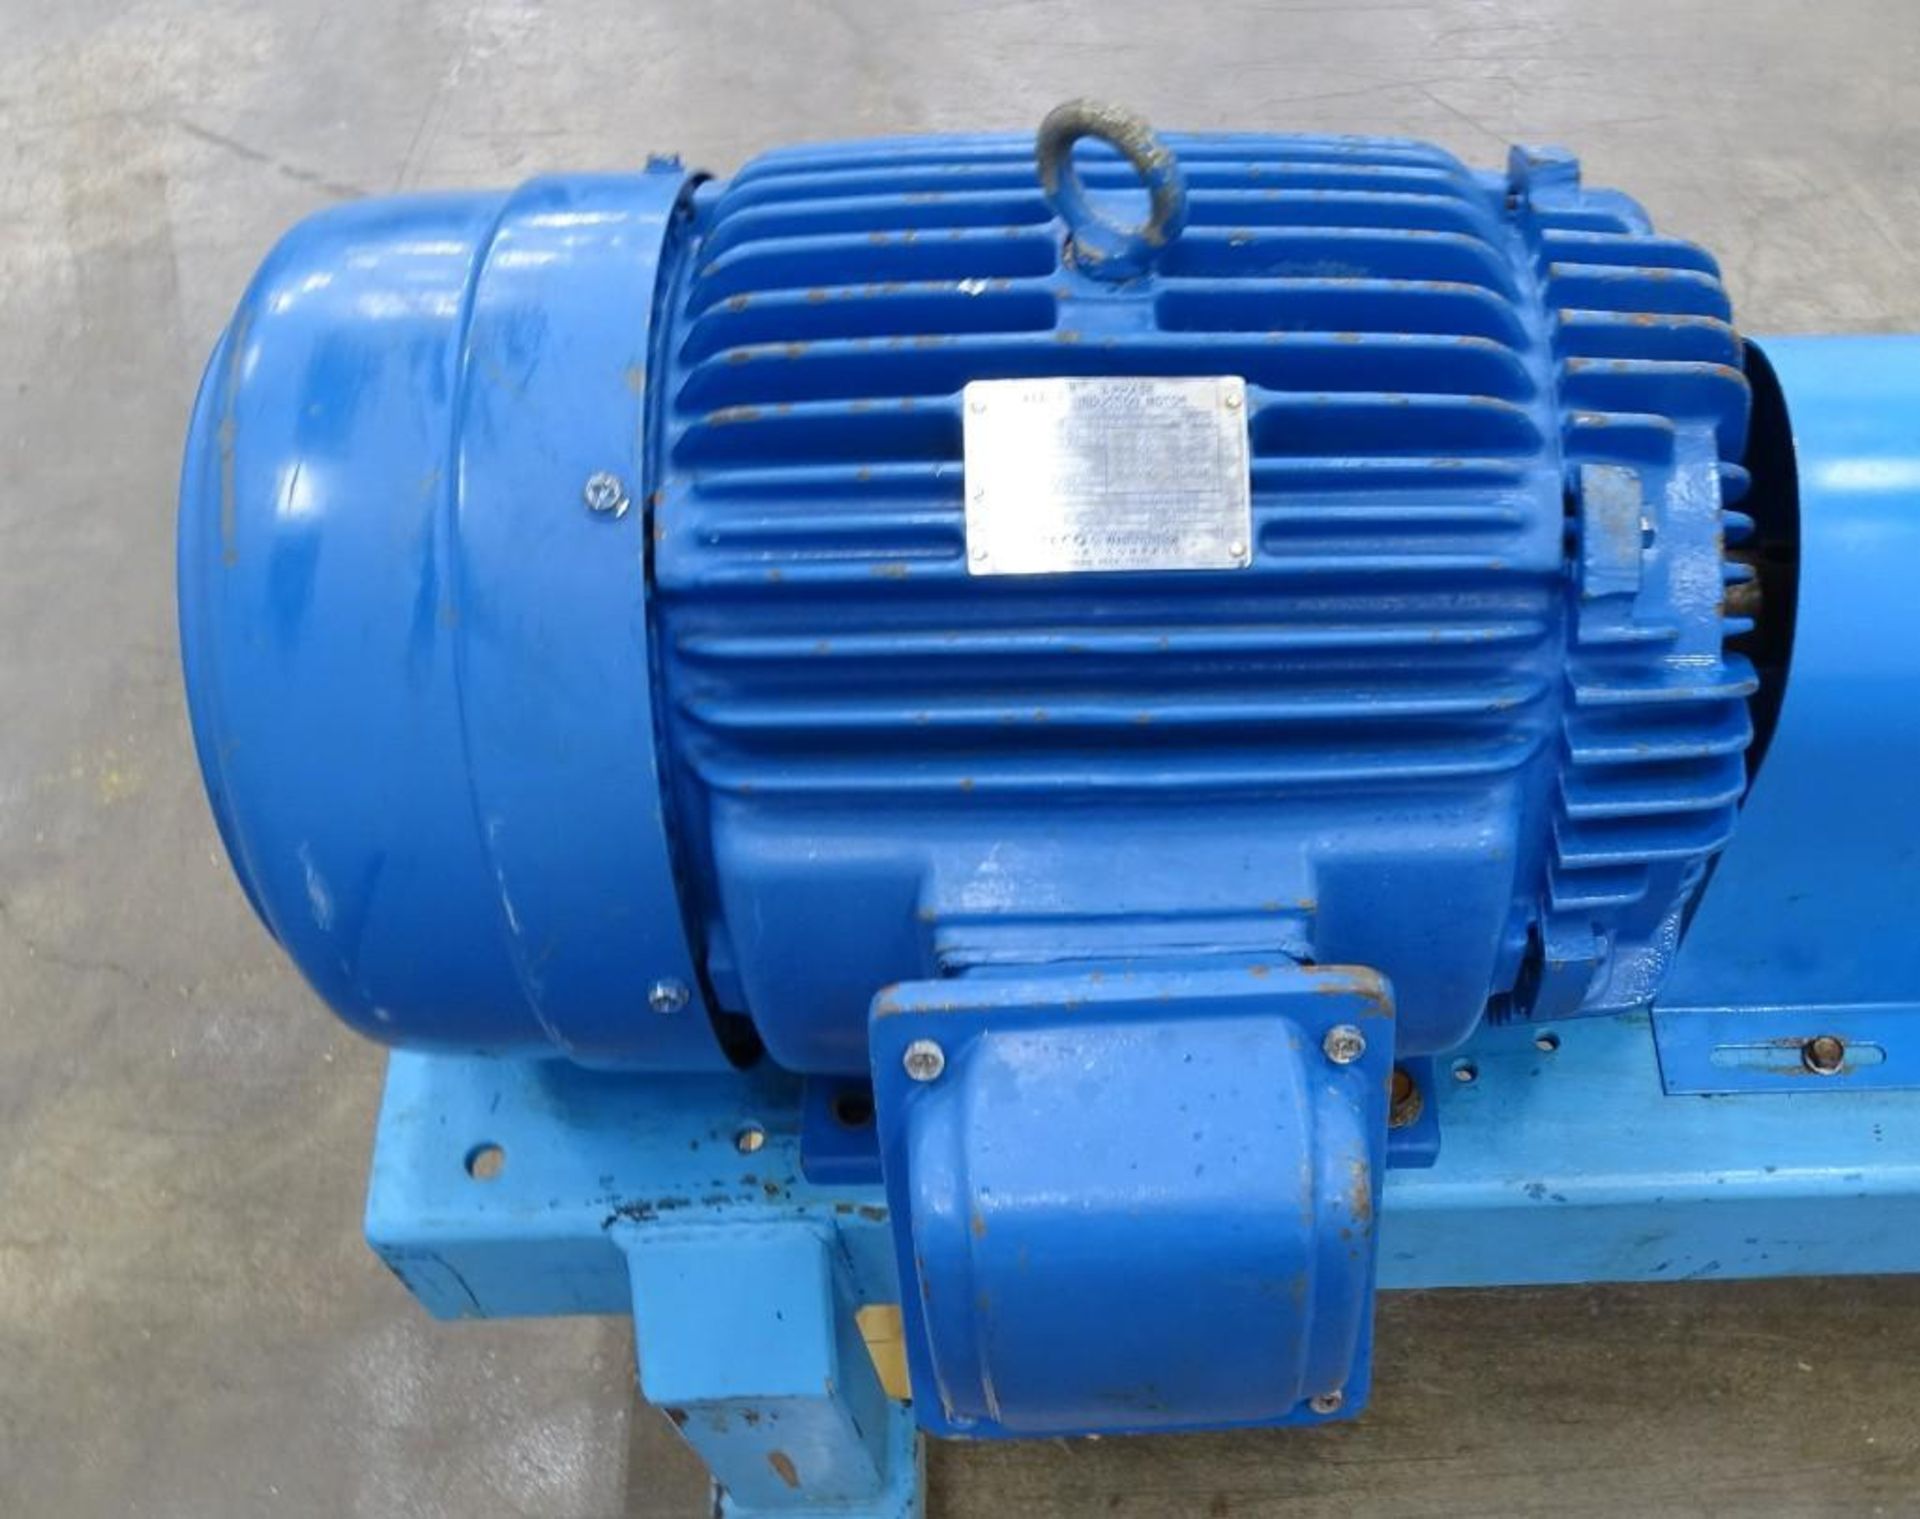 Goulds Centrifugal Pump with 15 HP Motor - Image 5 of 18